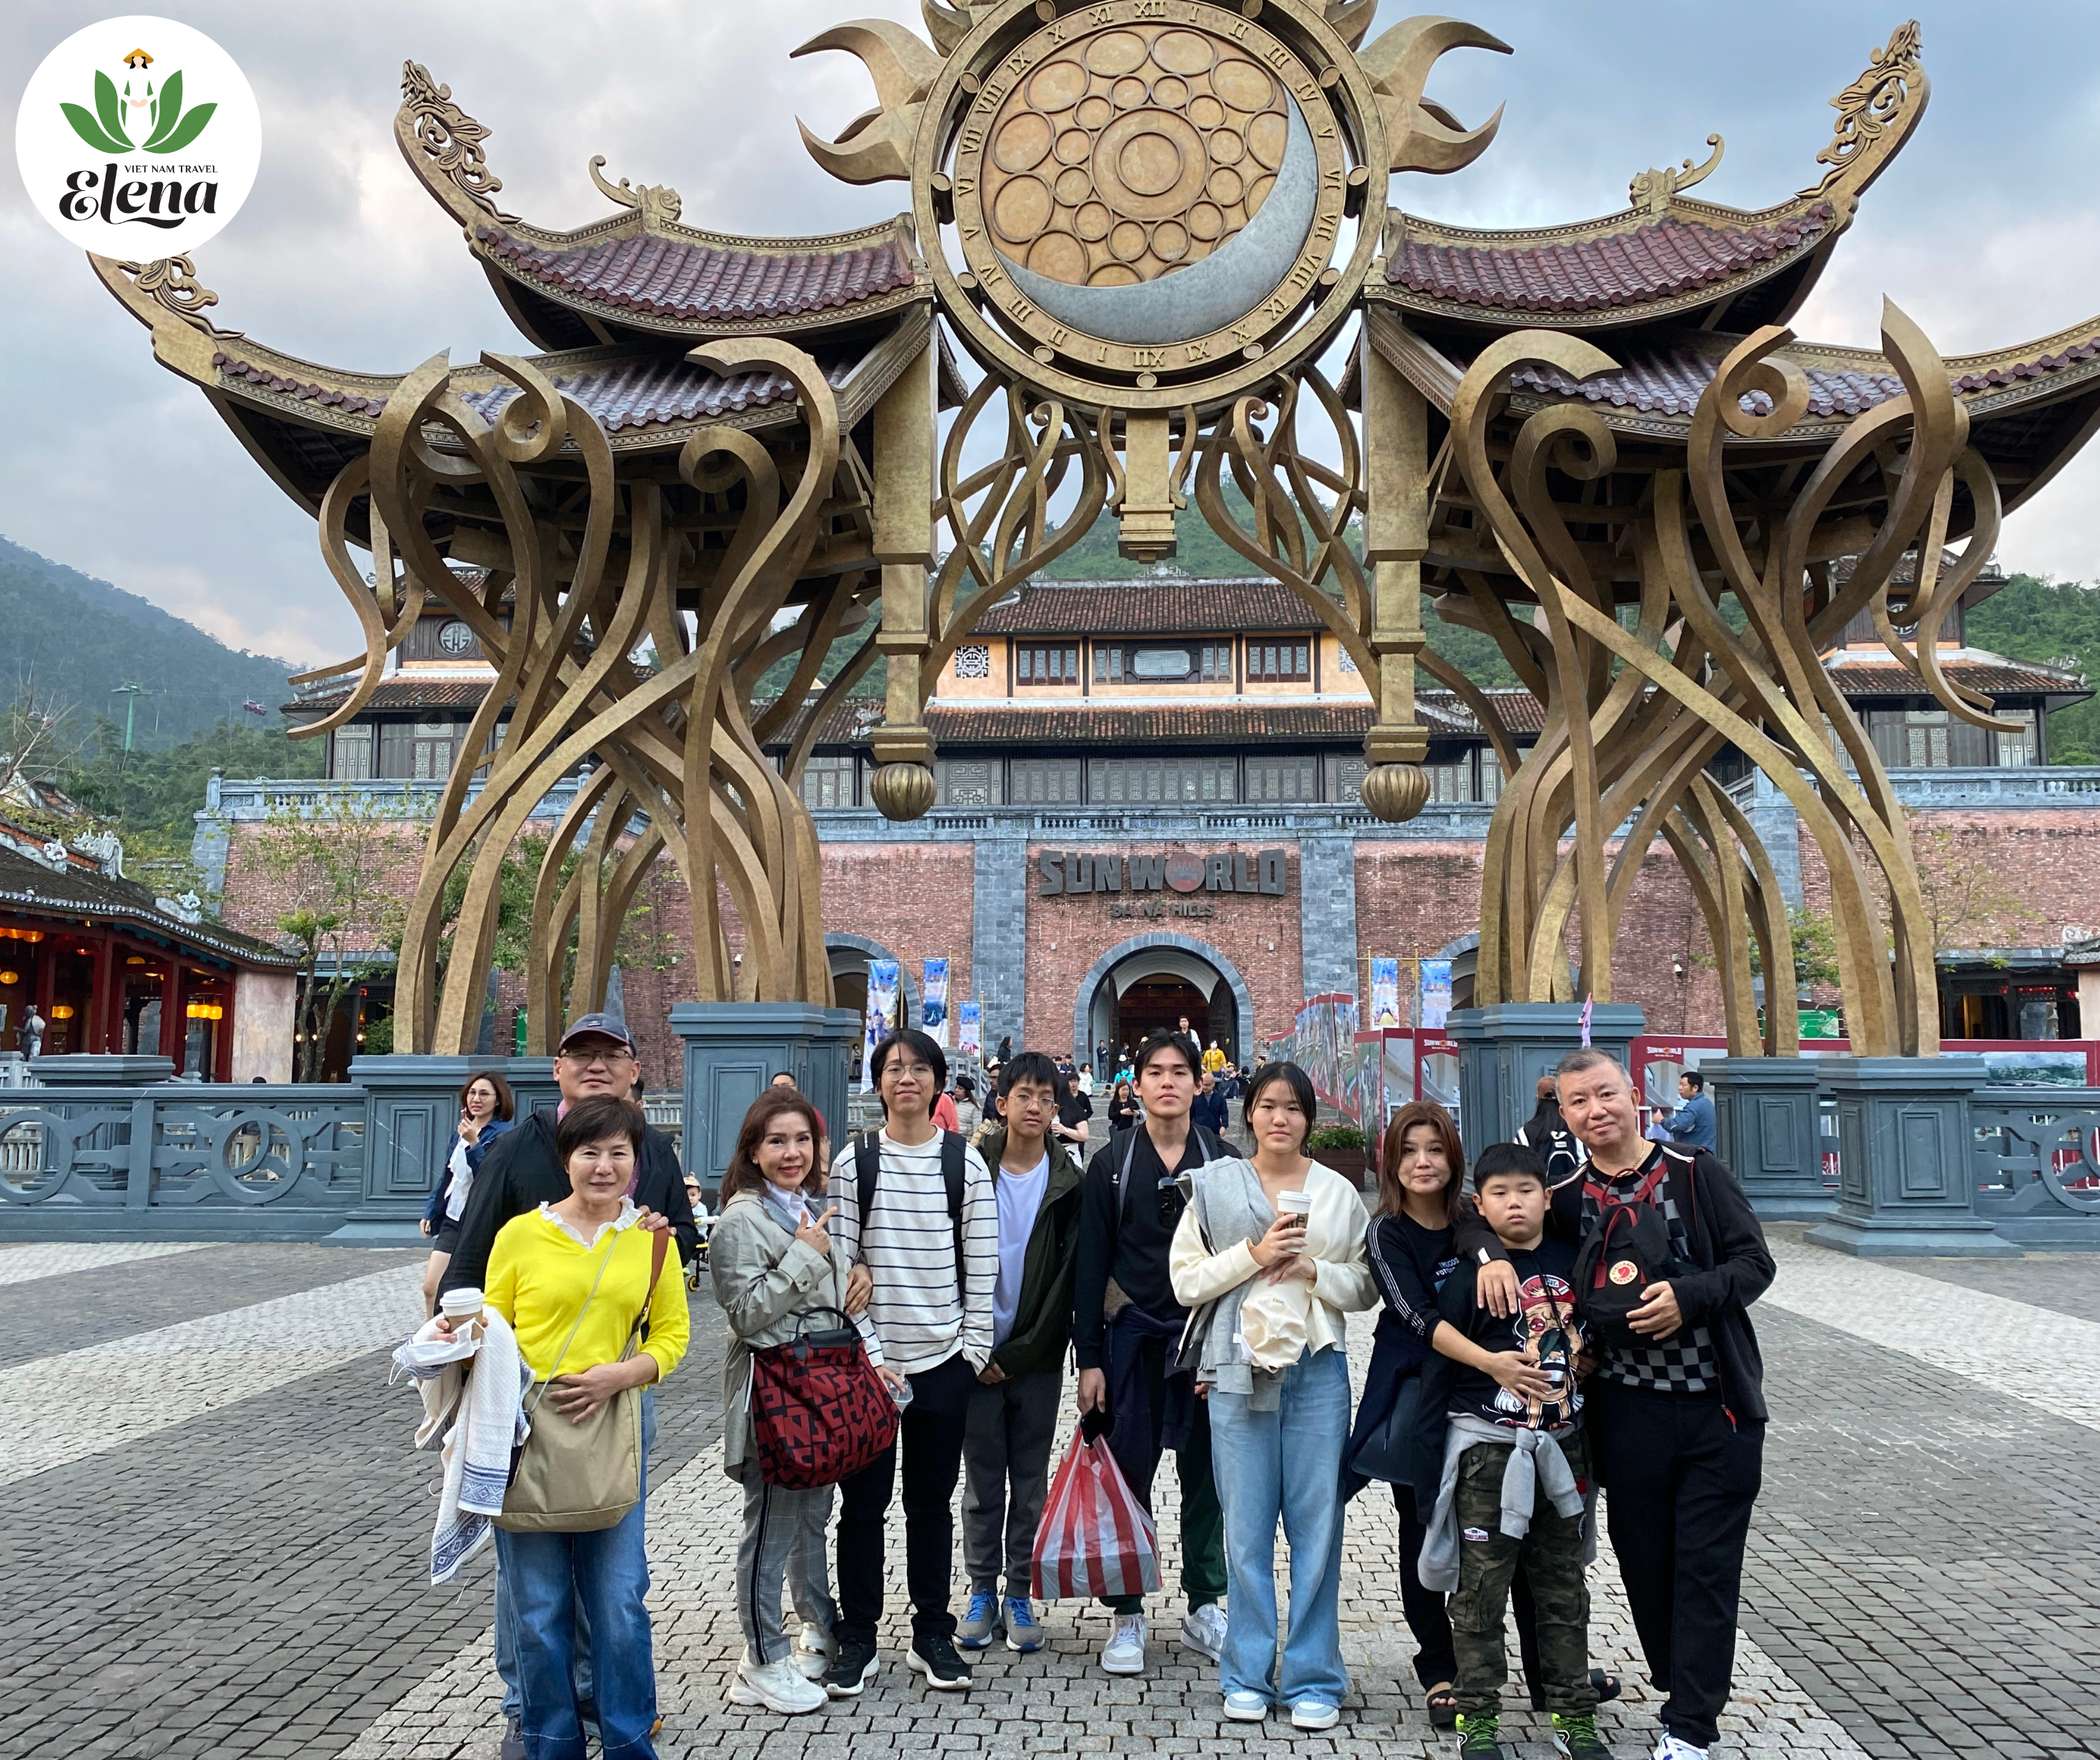 9 days-An amazing tour with Singaporean tourists, Mrs. Winnes and her family